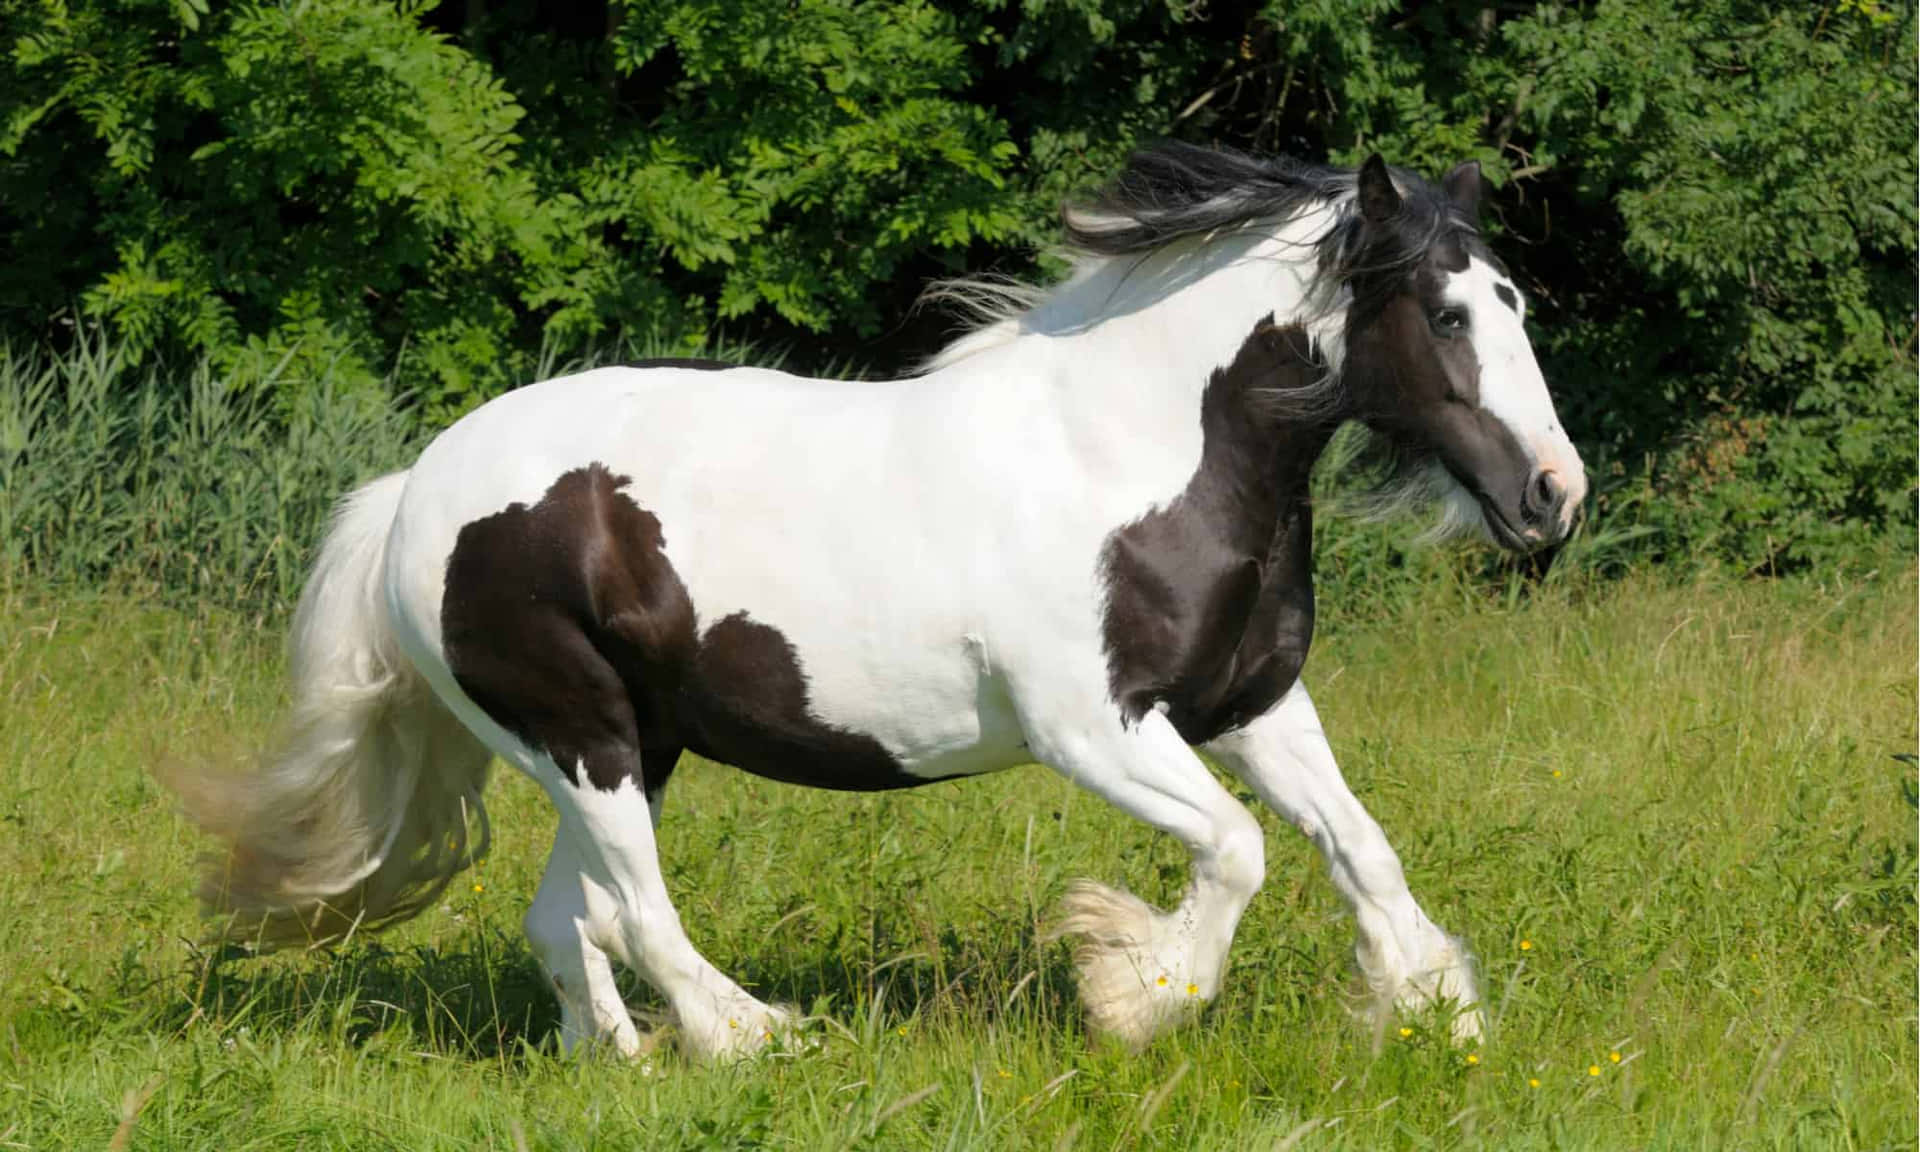 A proud and majestic white horse in its natural habitat